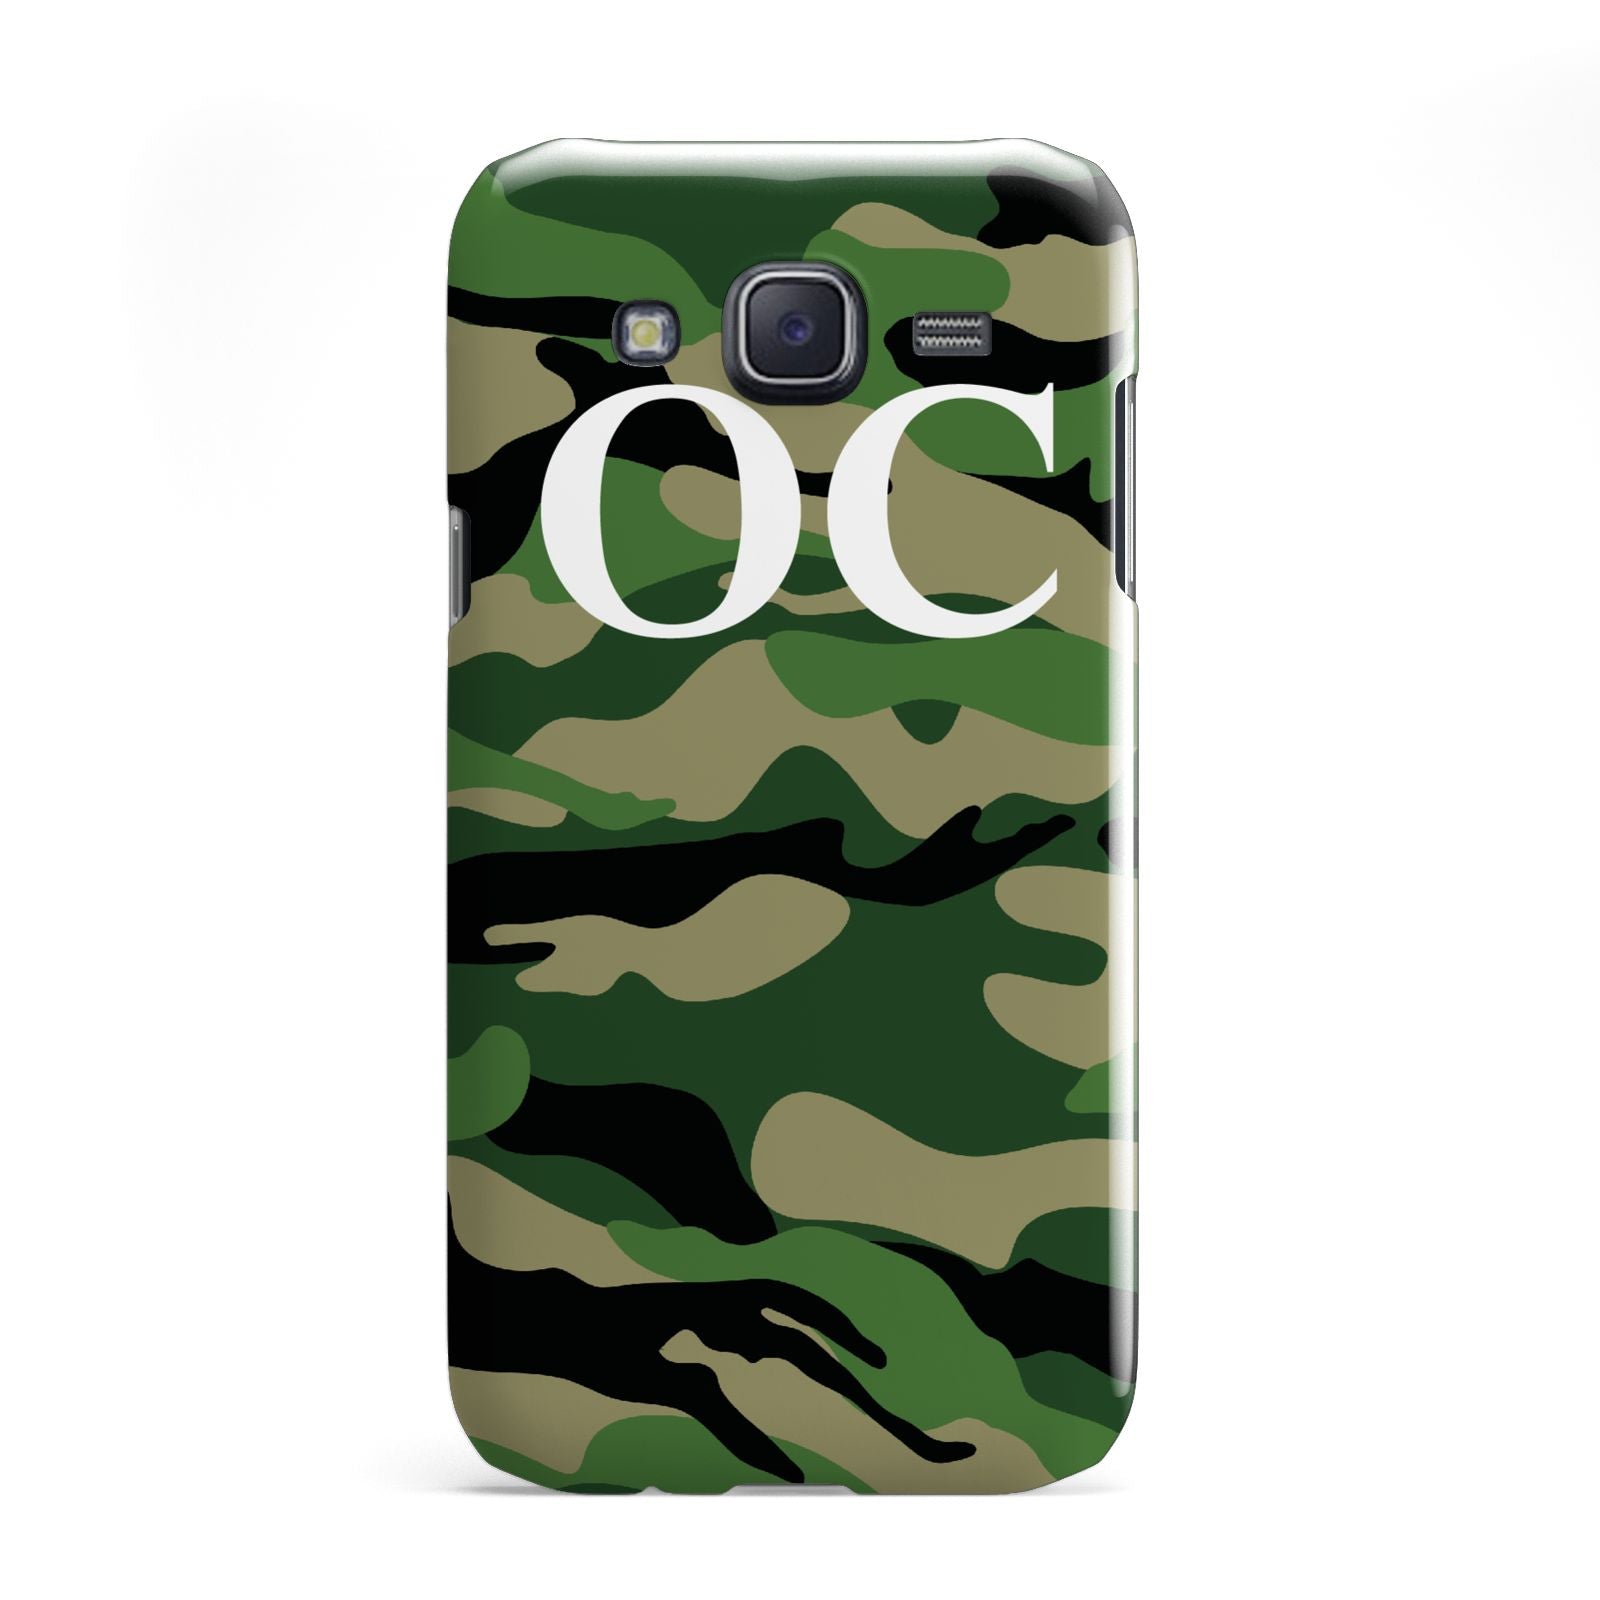 Personalised Camouflage Samsung Galaxy J5 Case